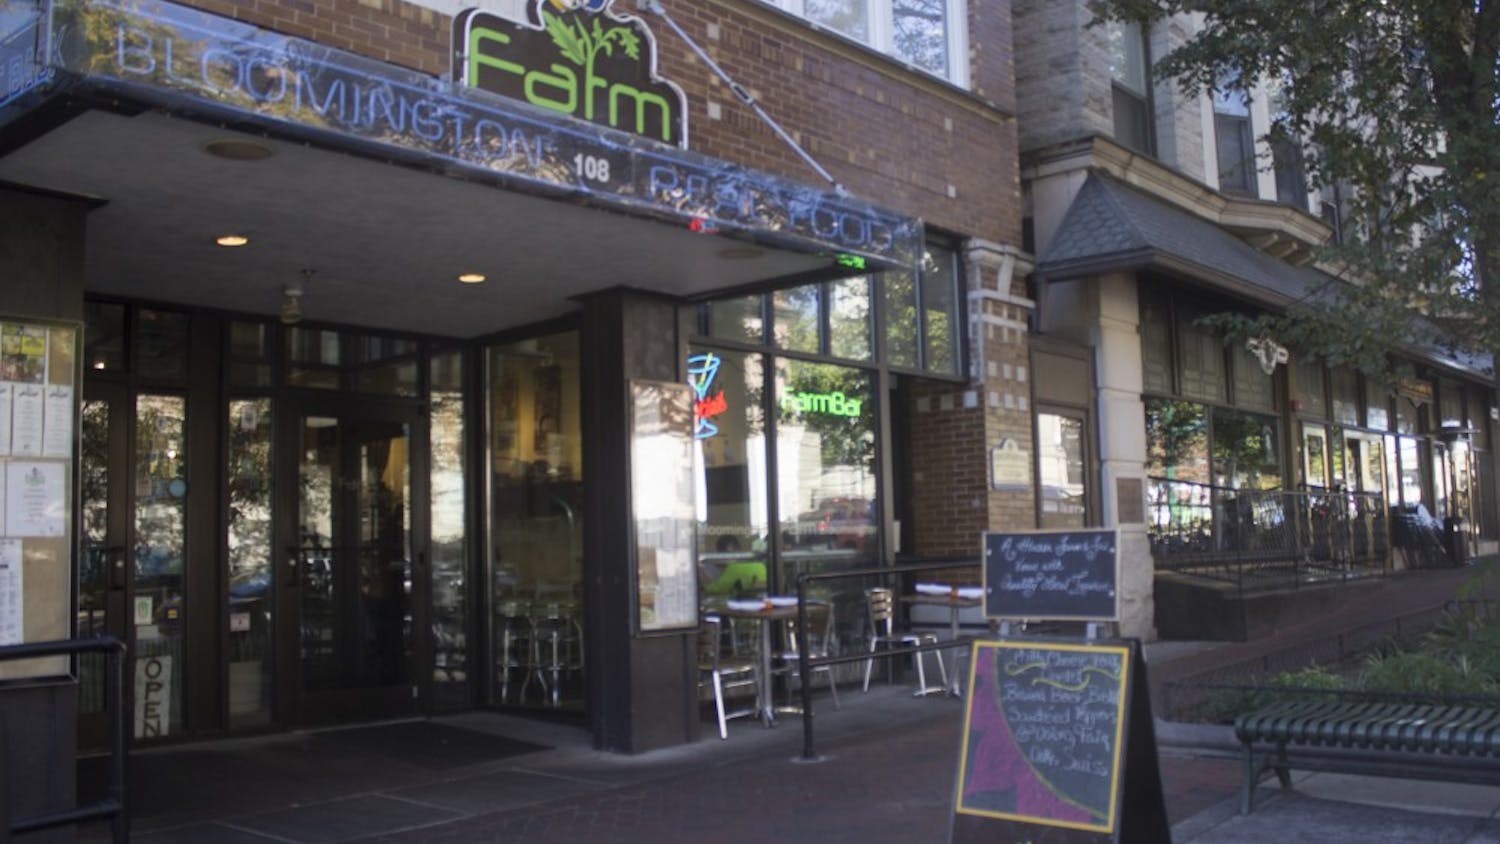 FARM Bloomington specializes in local foods with global flavors that change with the seasons. Jordyn Fox of FARM Bloomington said they will likely put out an east-coast themed special for Homecoming to relate to Rutgerss being from New Jersey. 